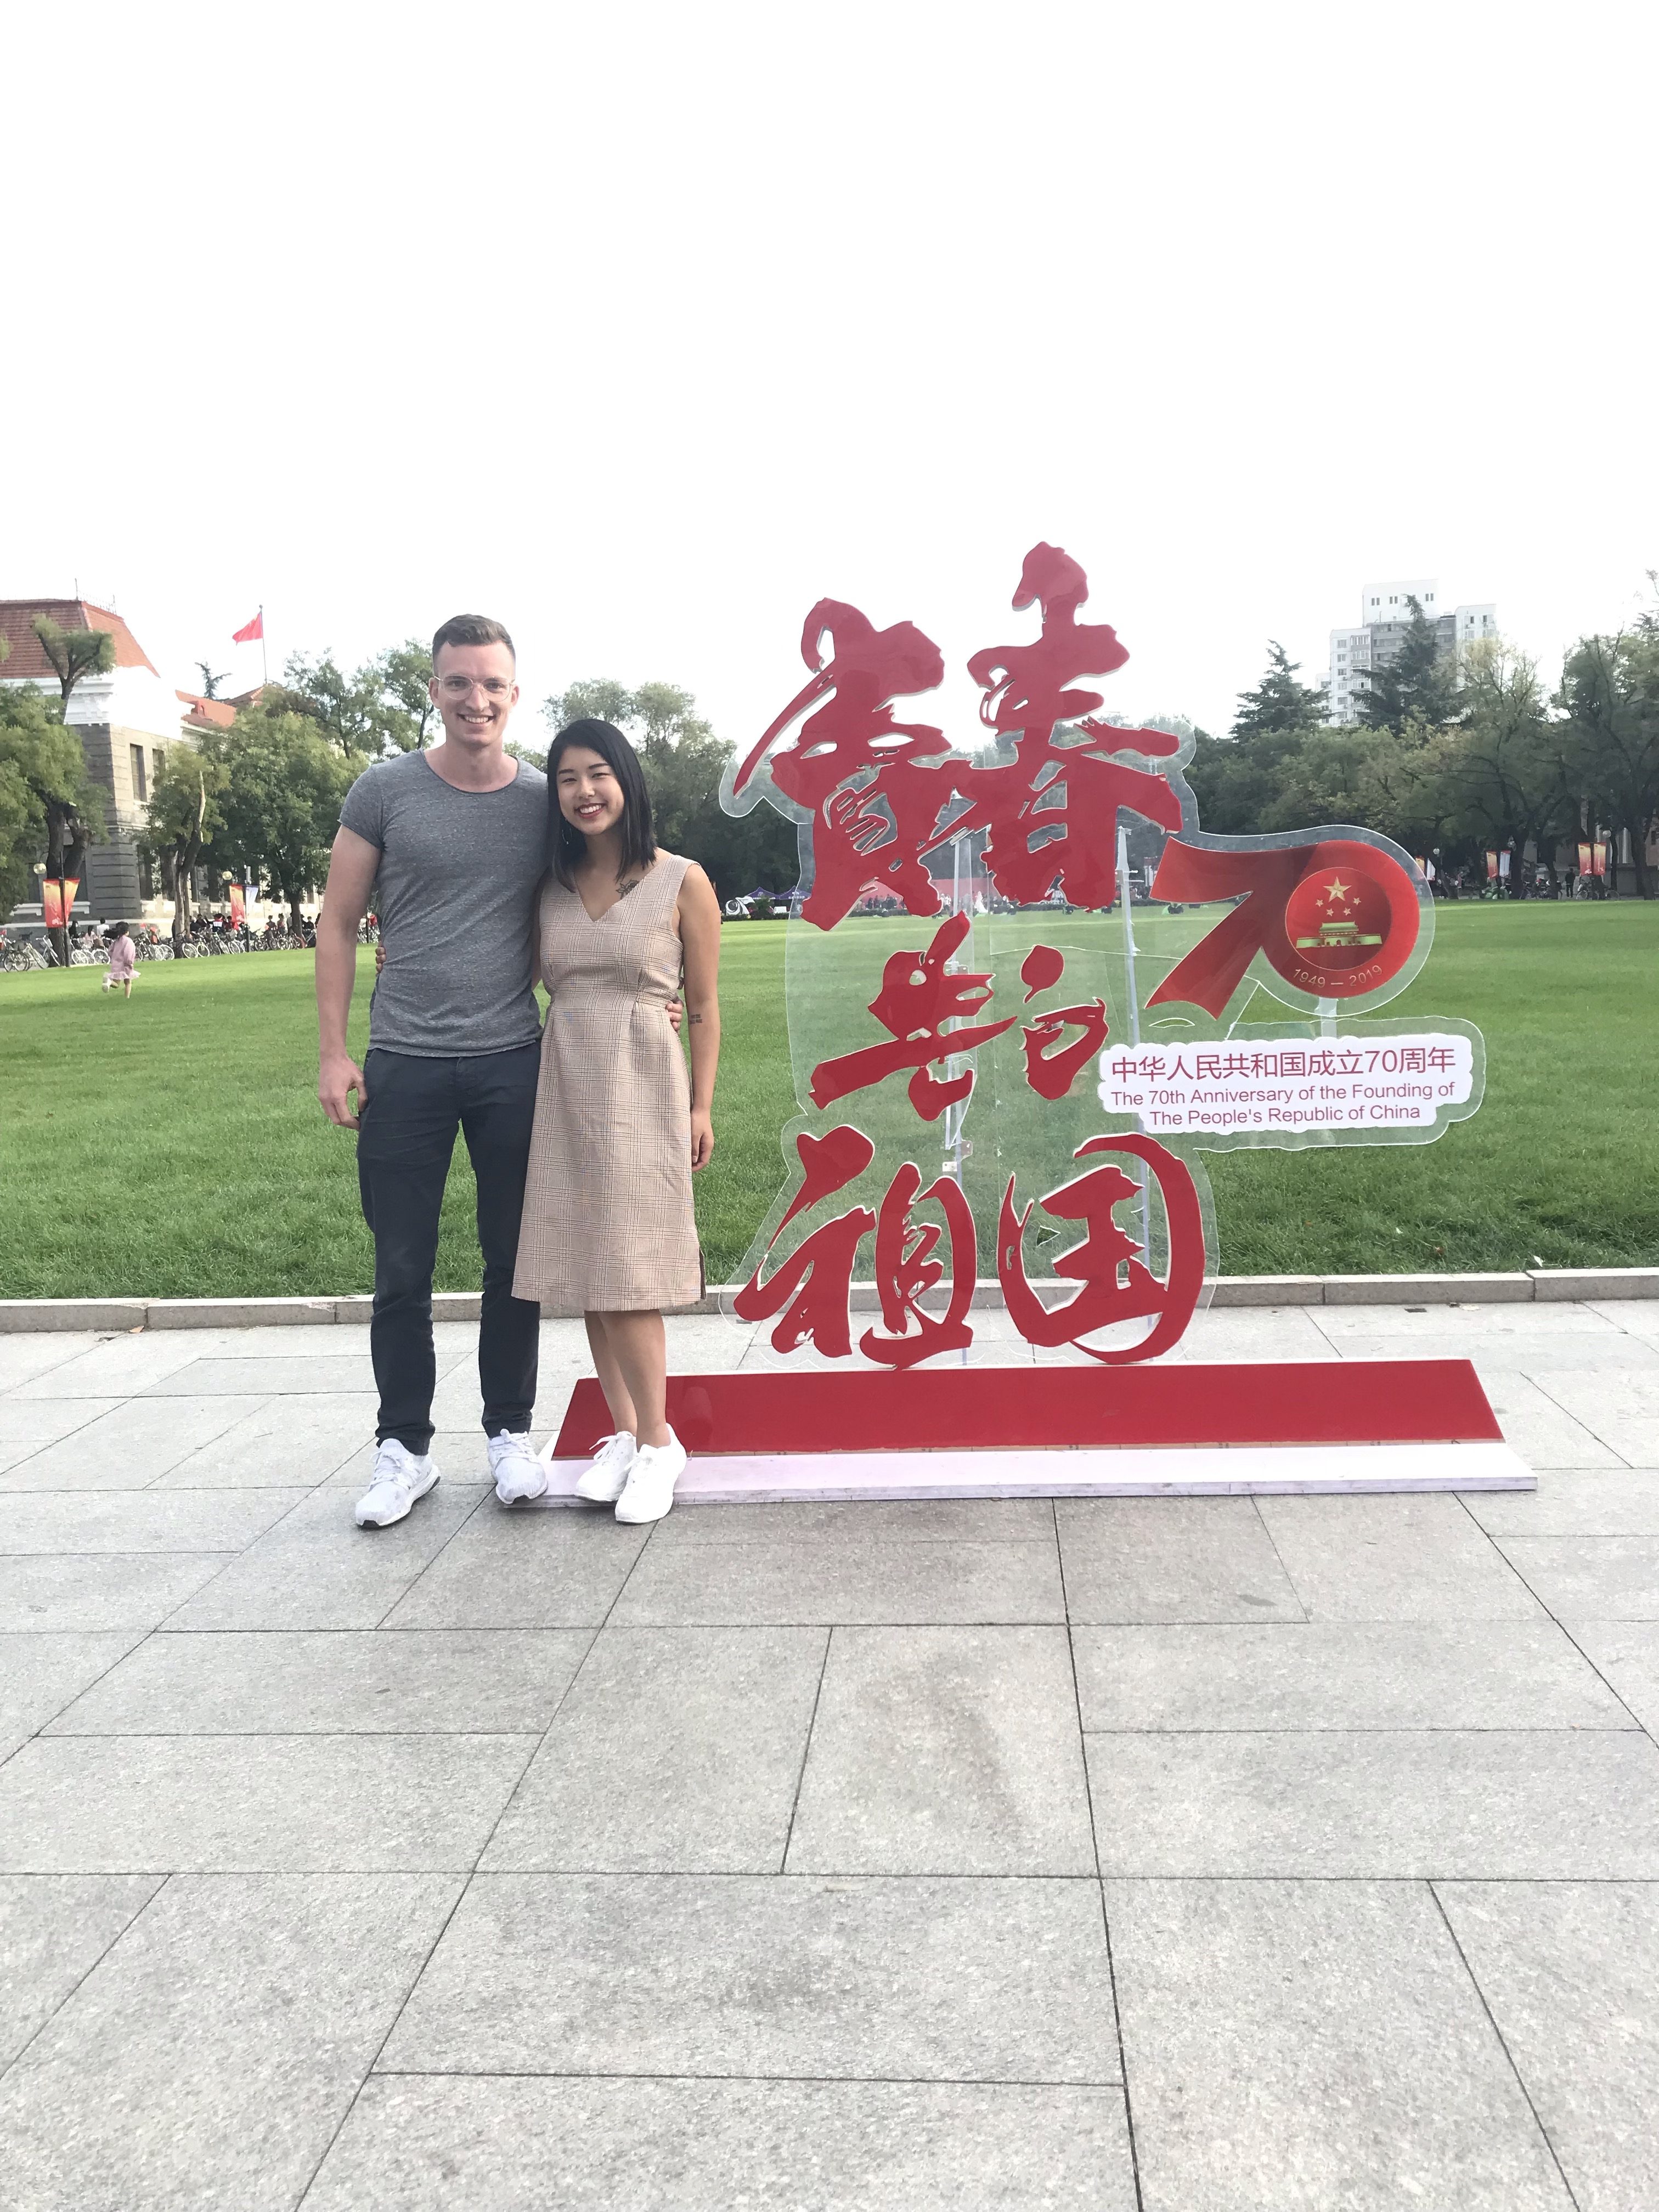 70th Anniversary decor can be seen everywhere in Beijing. Here is a picture on Tsinghua's campus with my friend Michi from Germany!